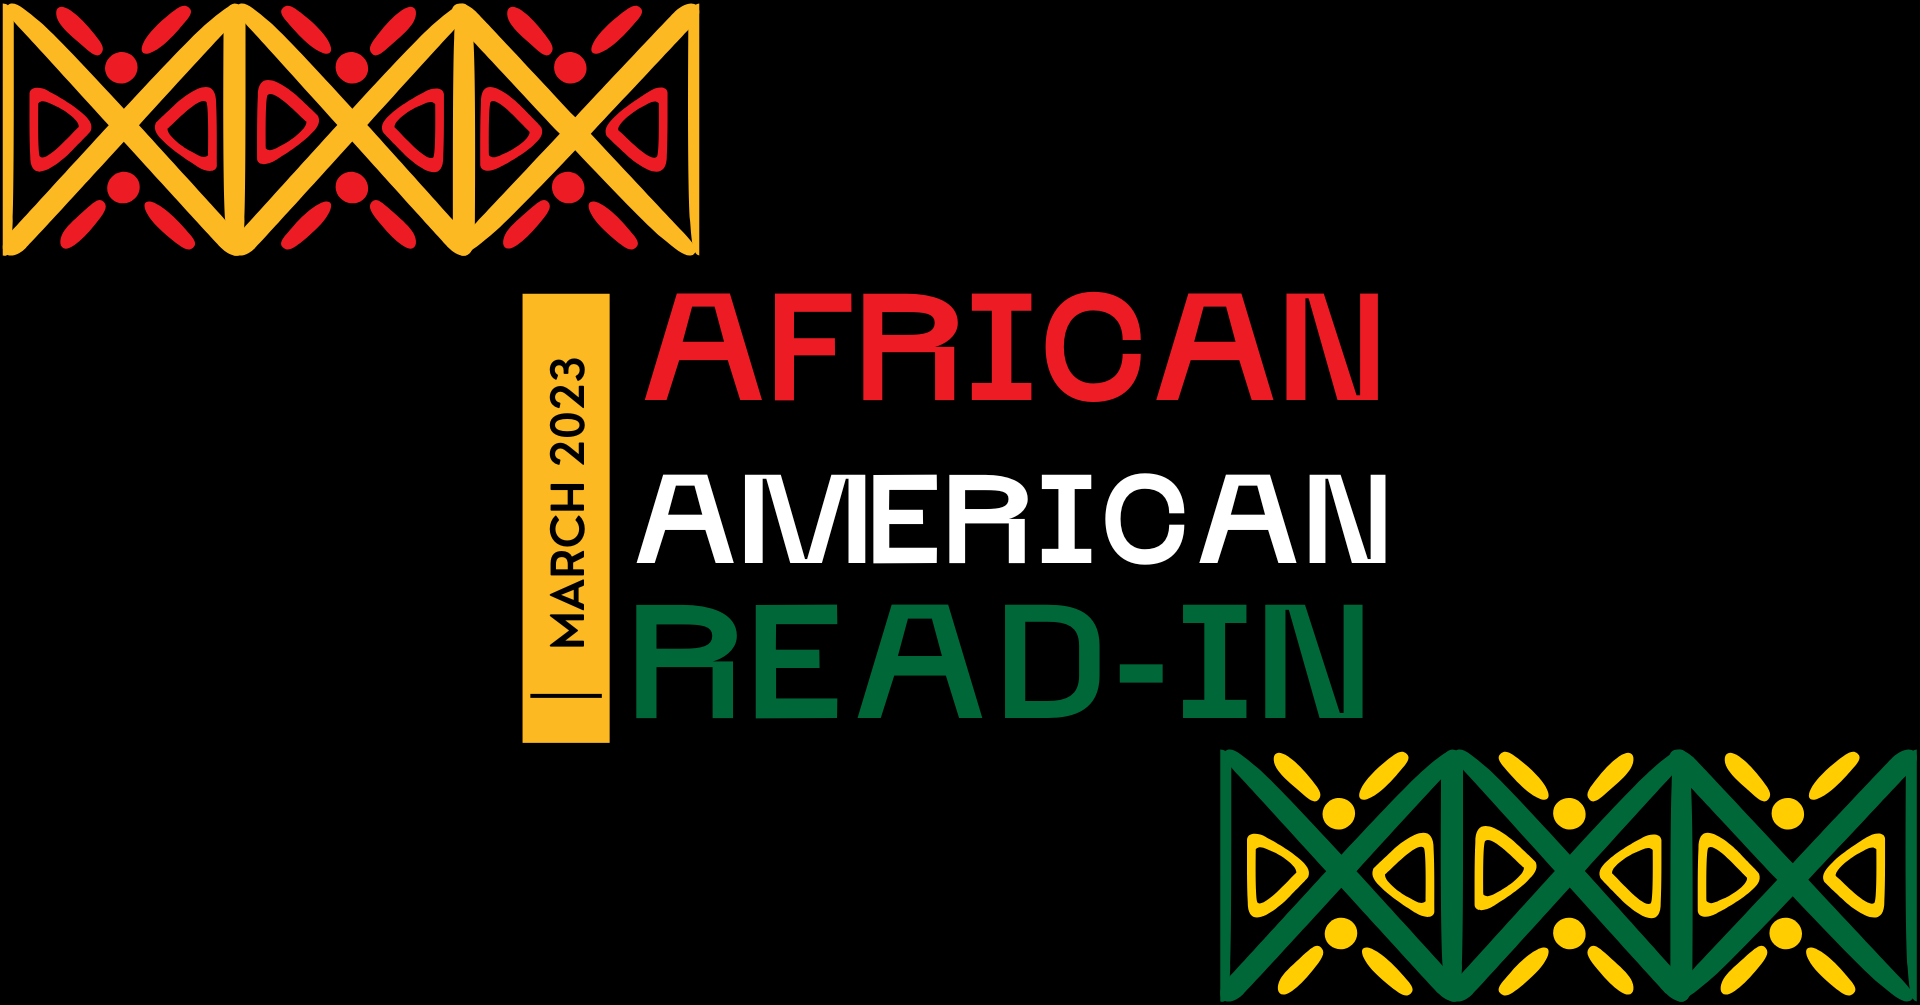 African American READ-IN